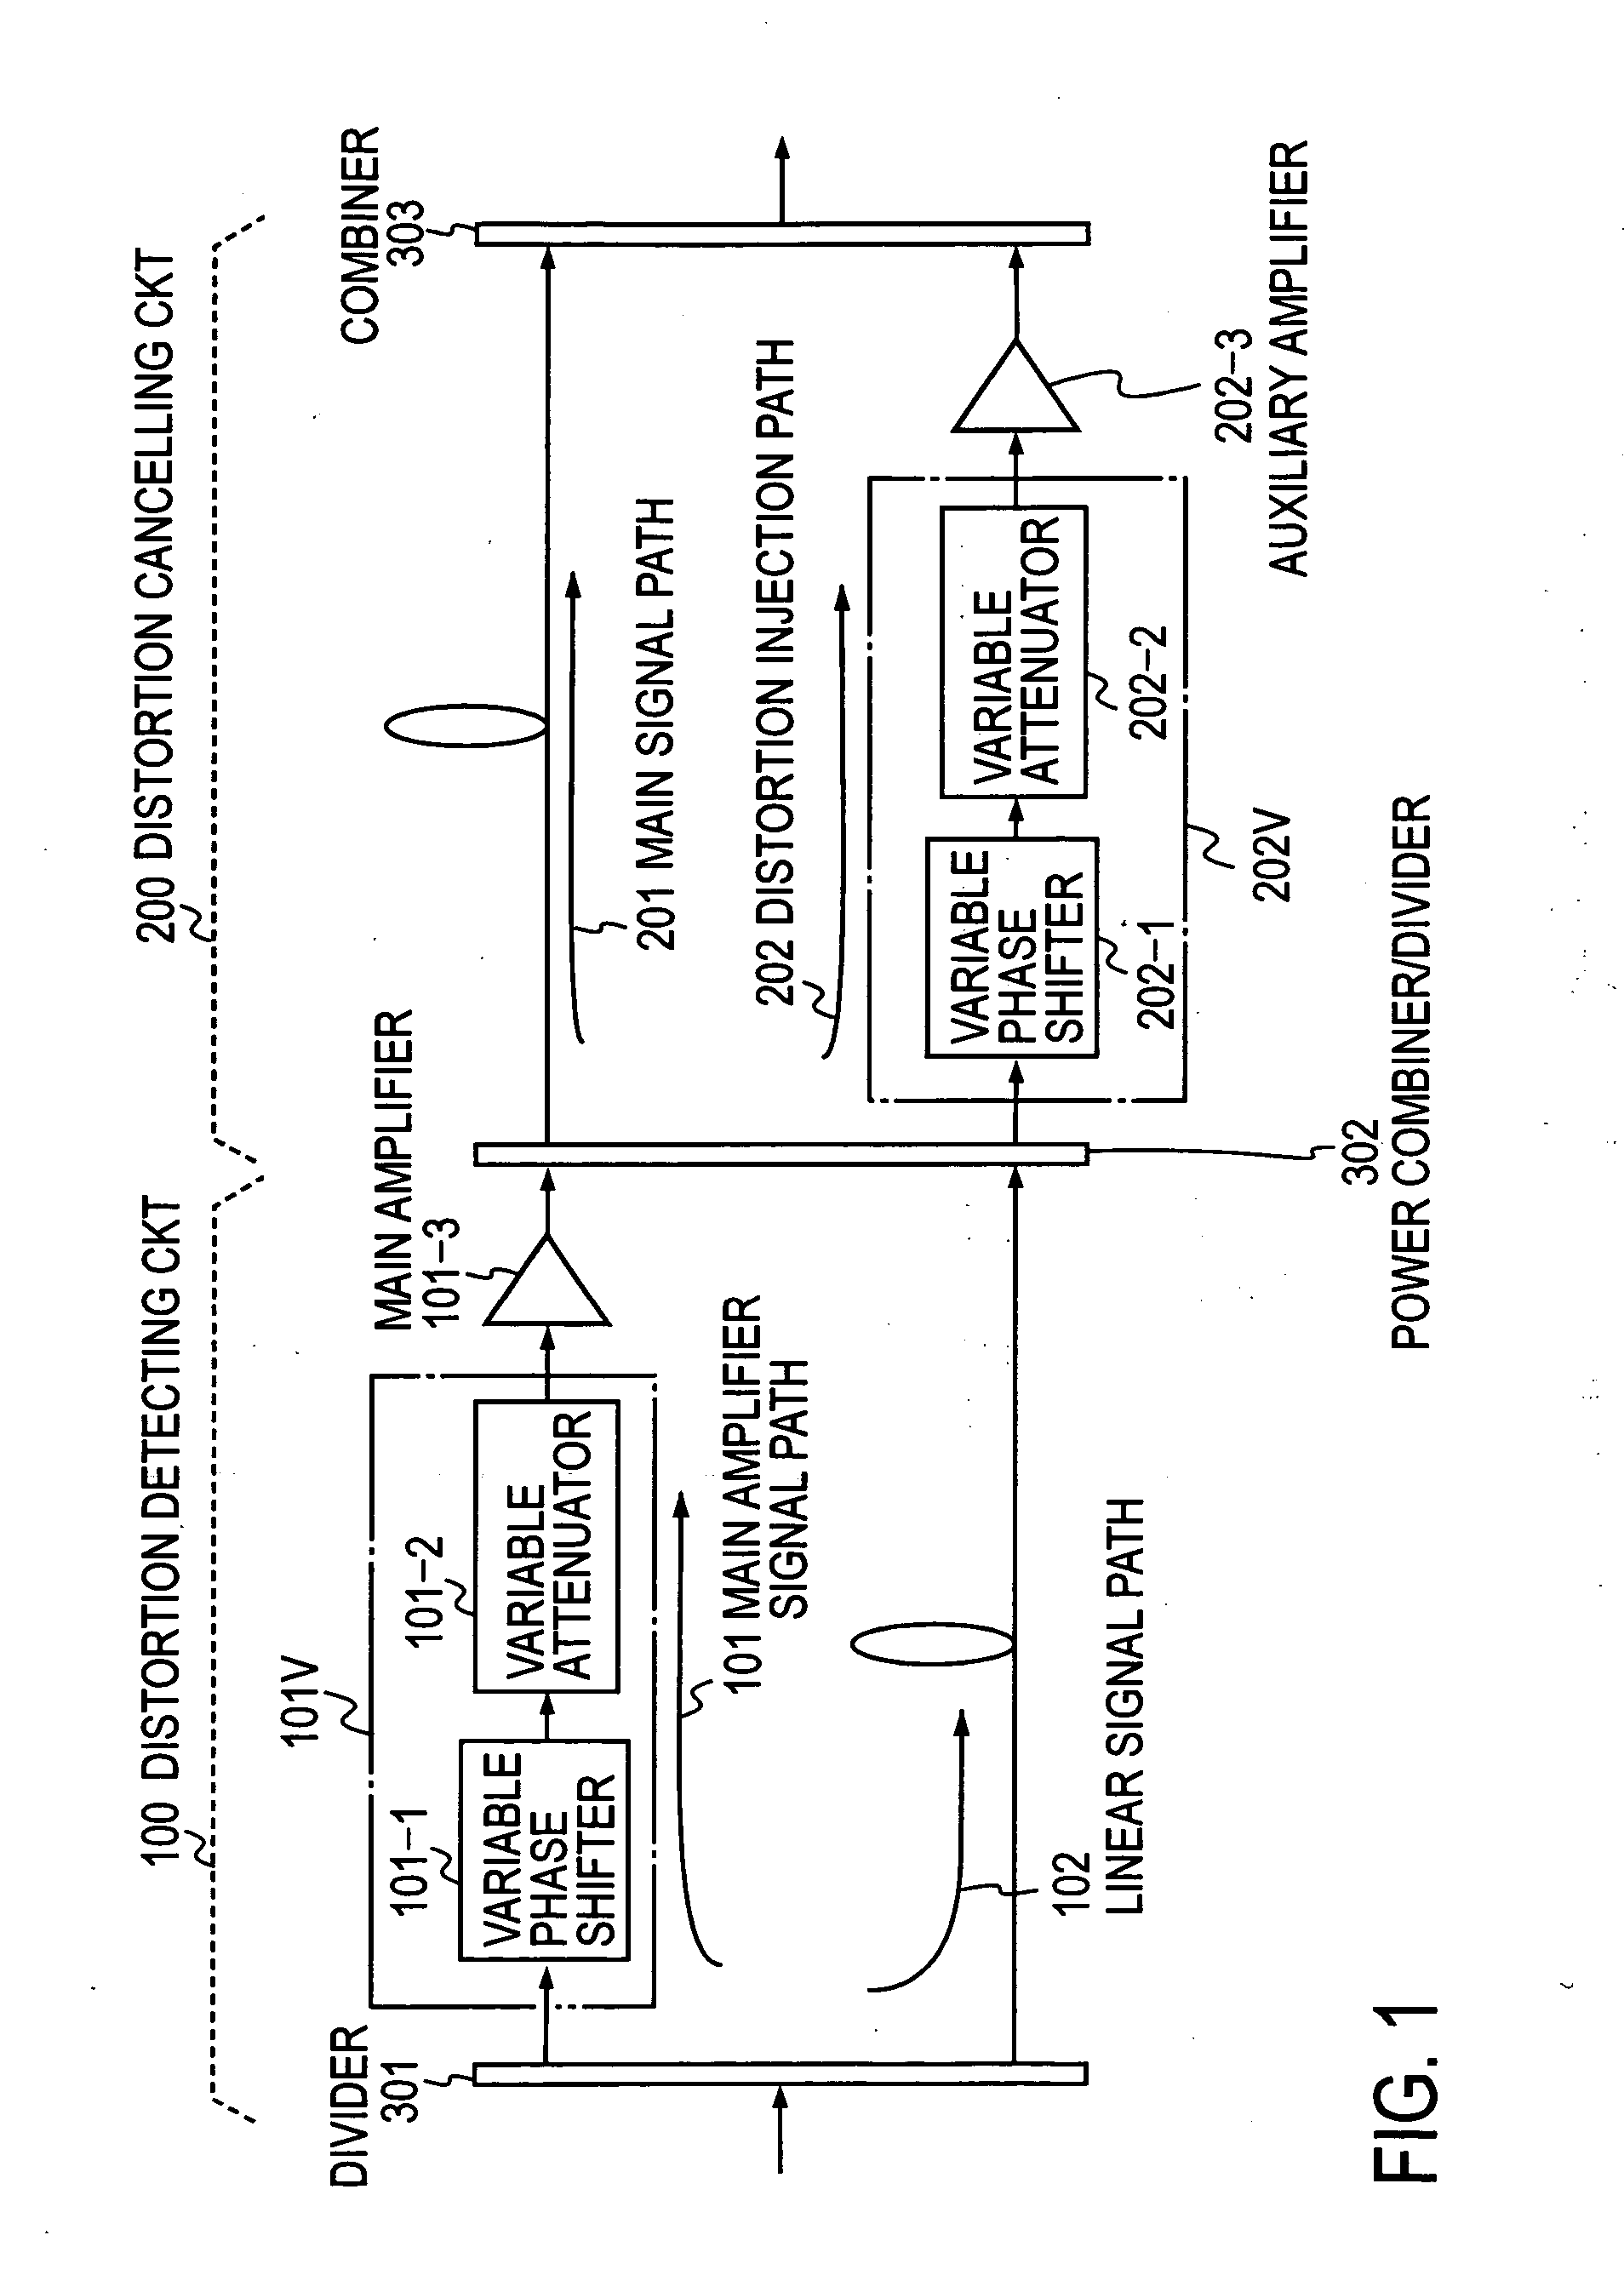 Multi-band feed-forward amplifier and adjustment method therefor